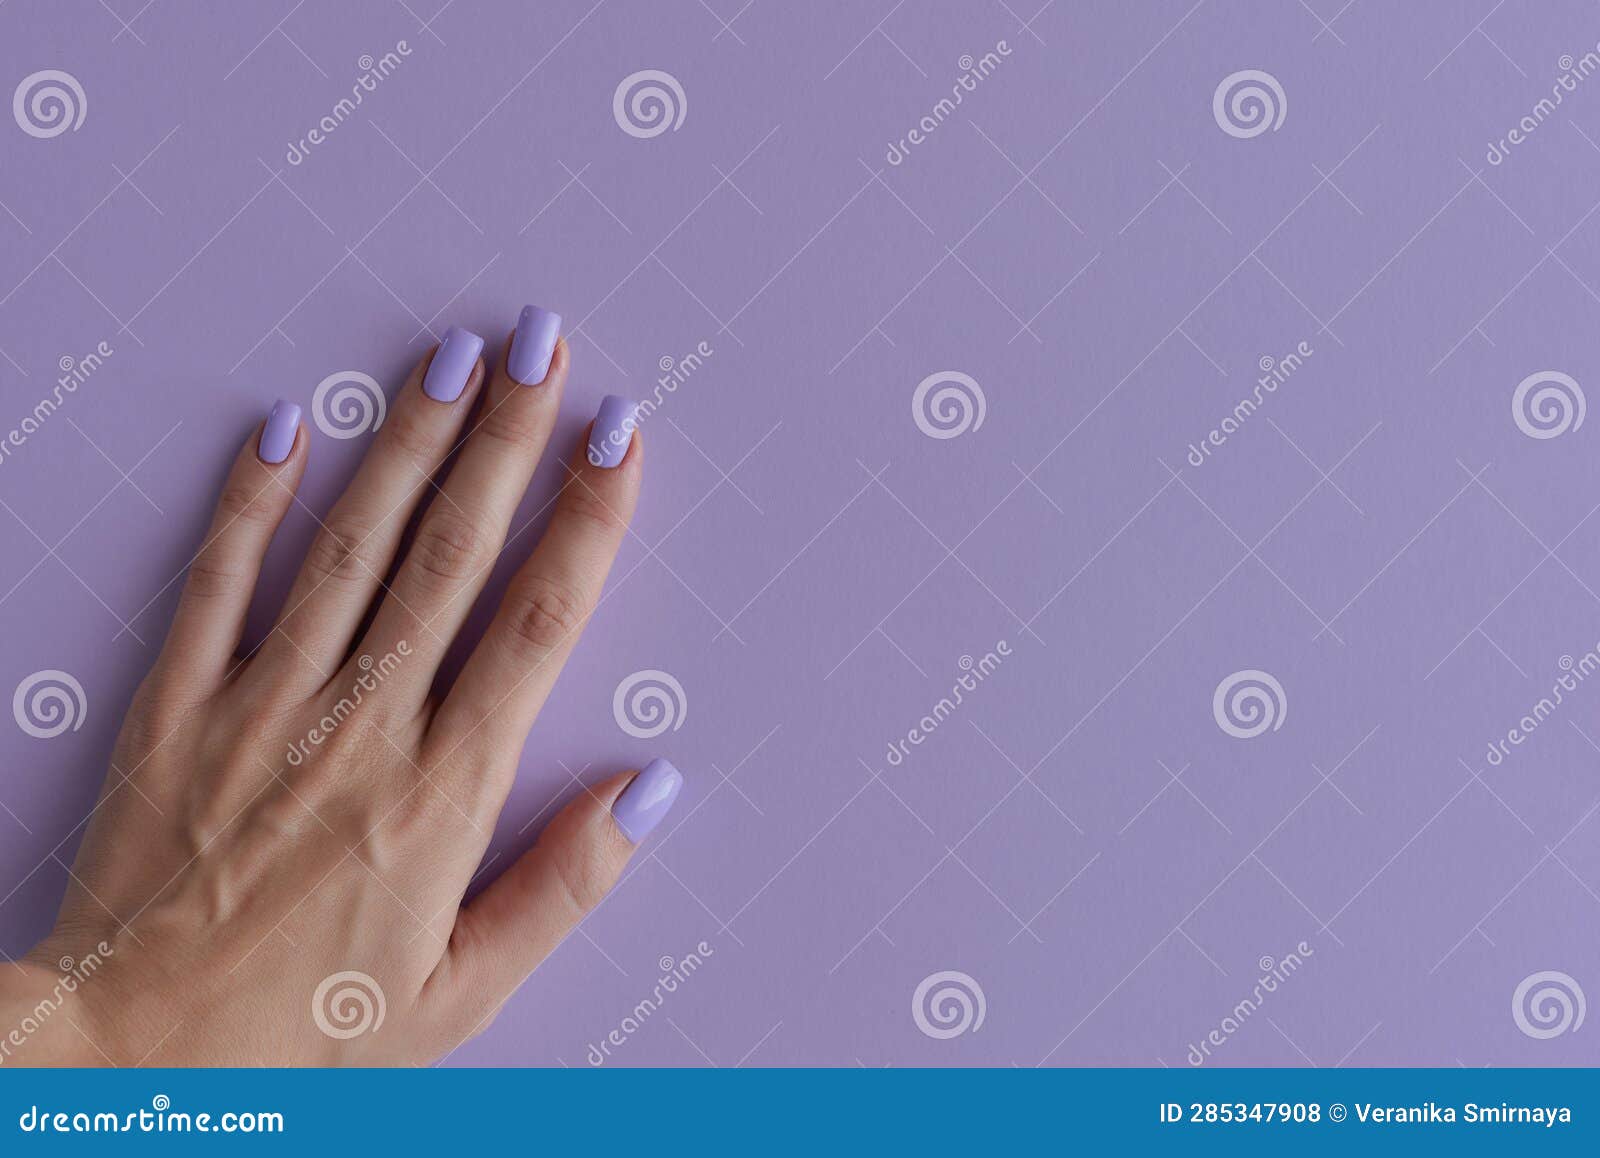 female's hand with nails of purple color